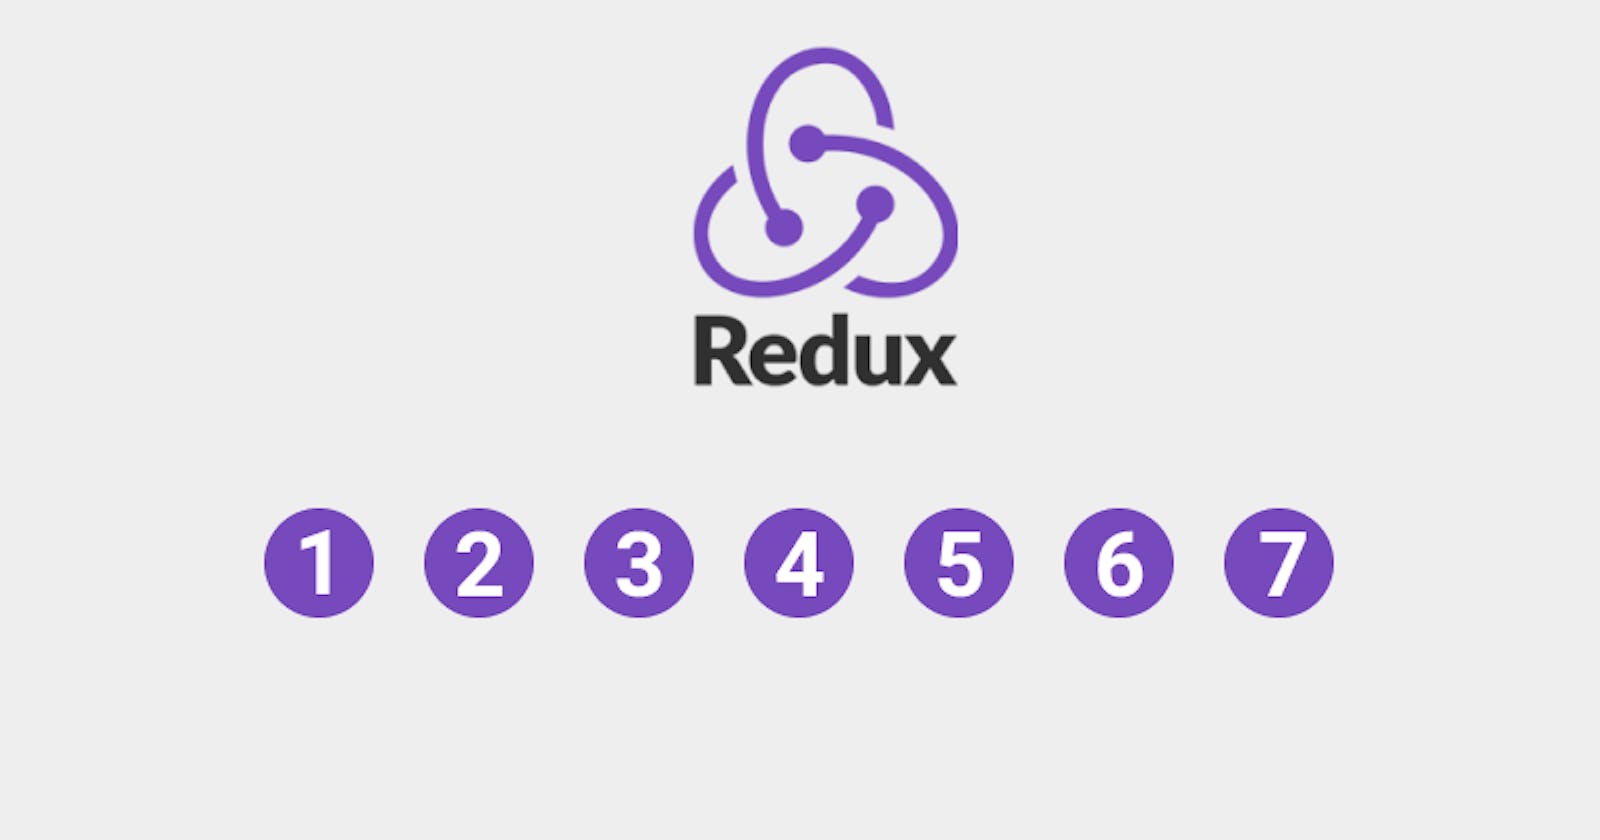 7 steps to understand React Redux